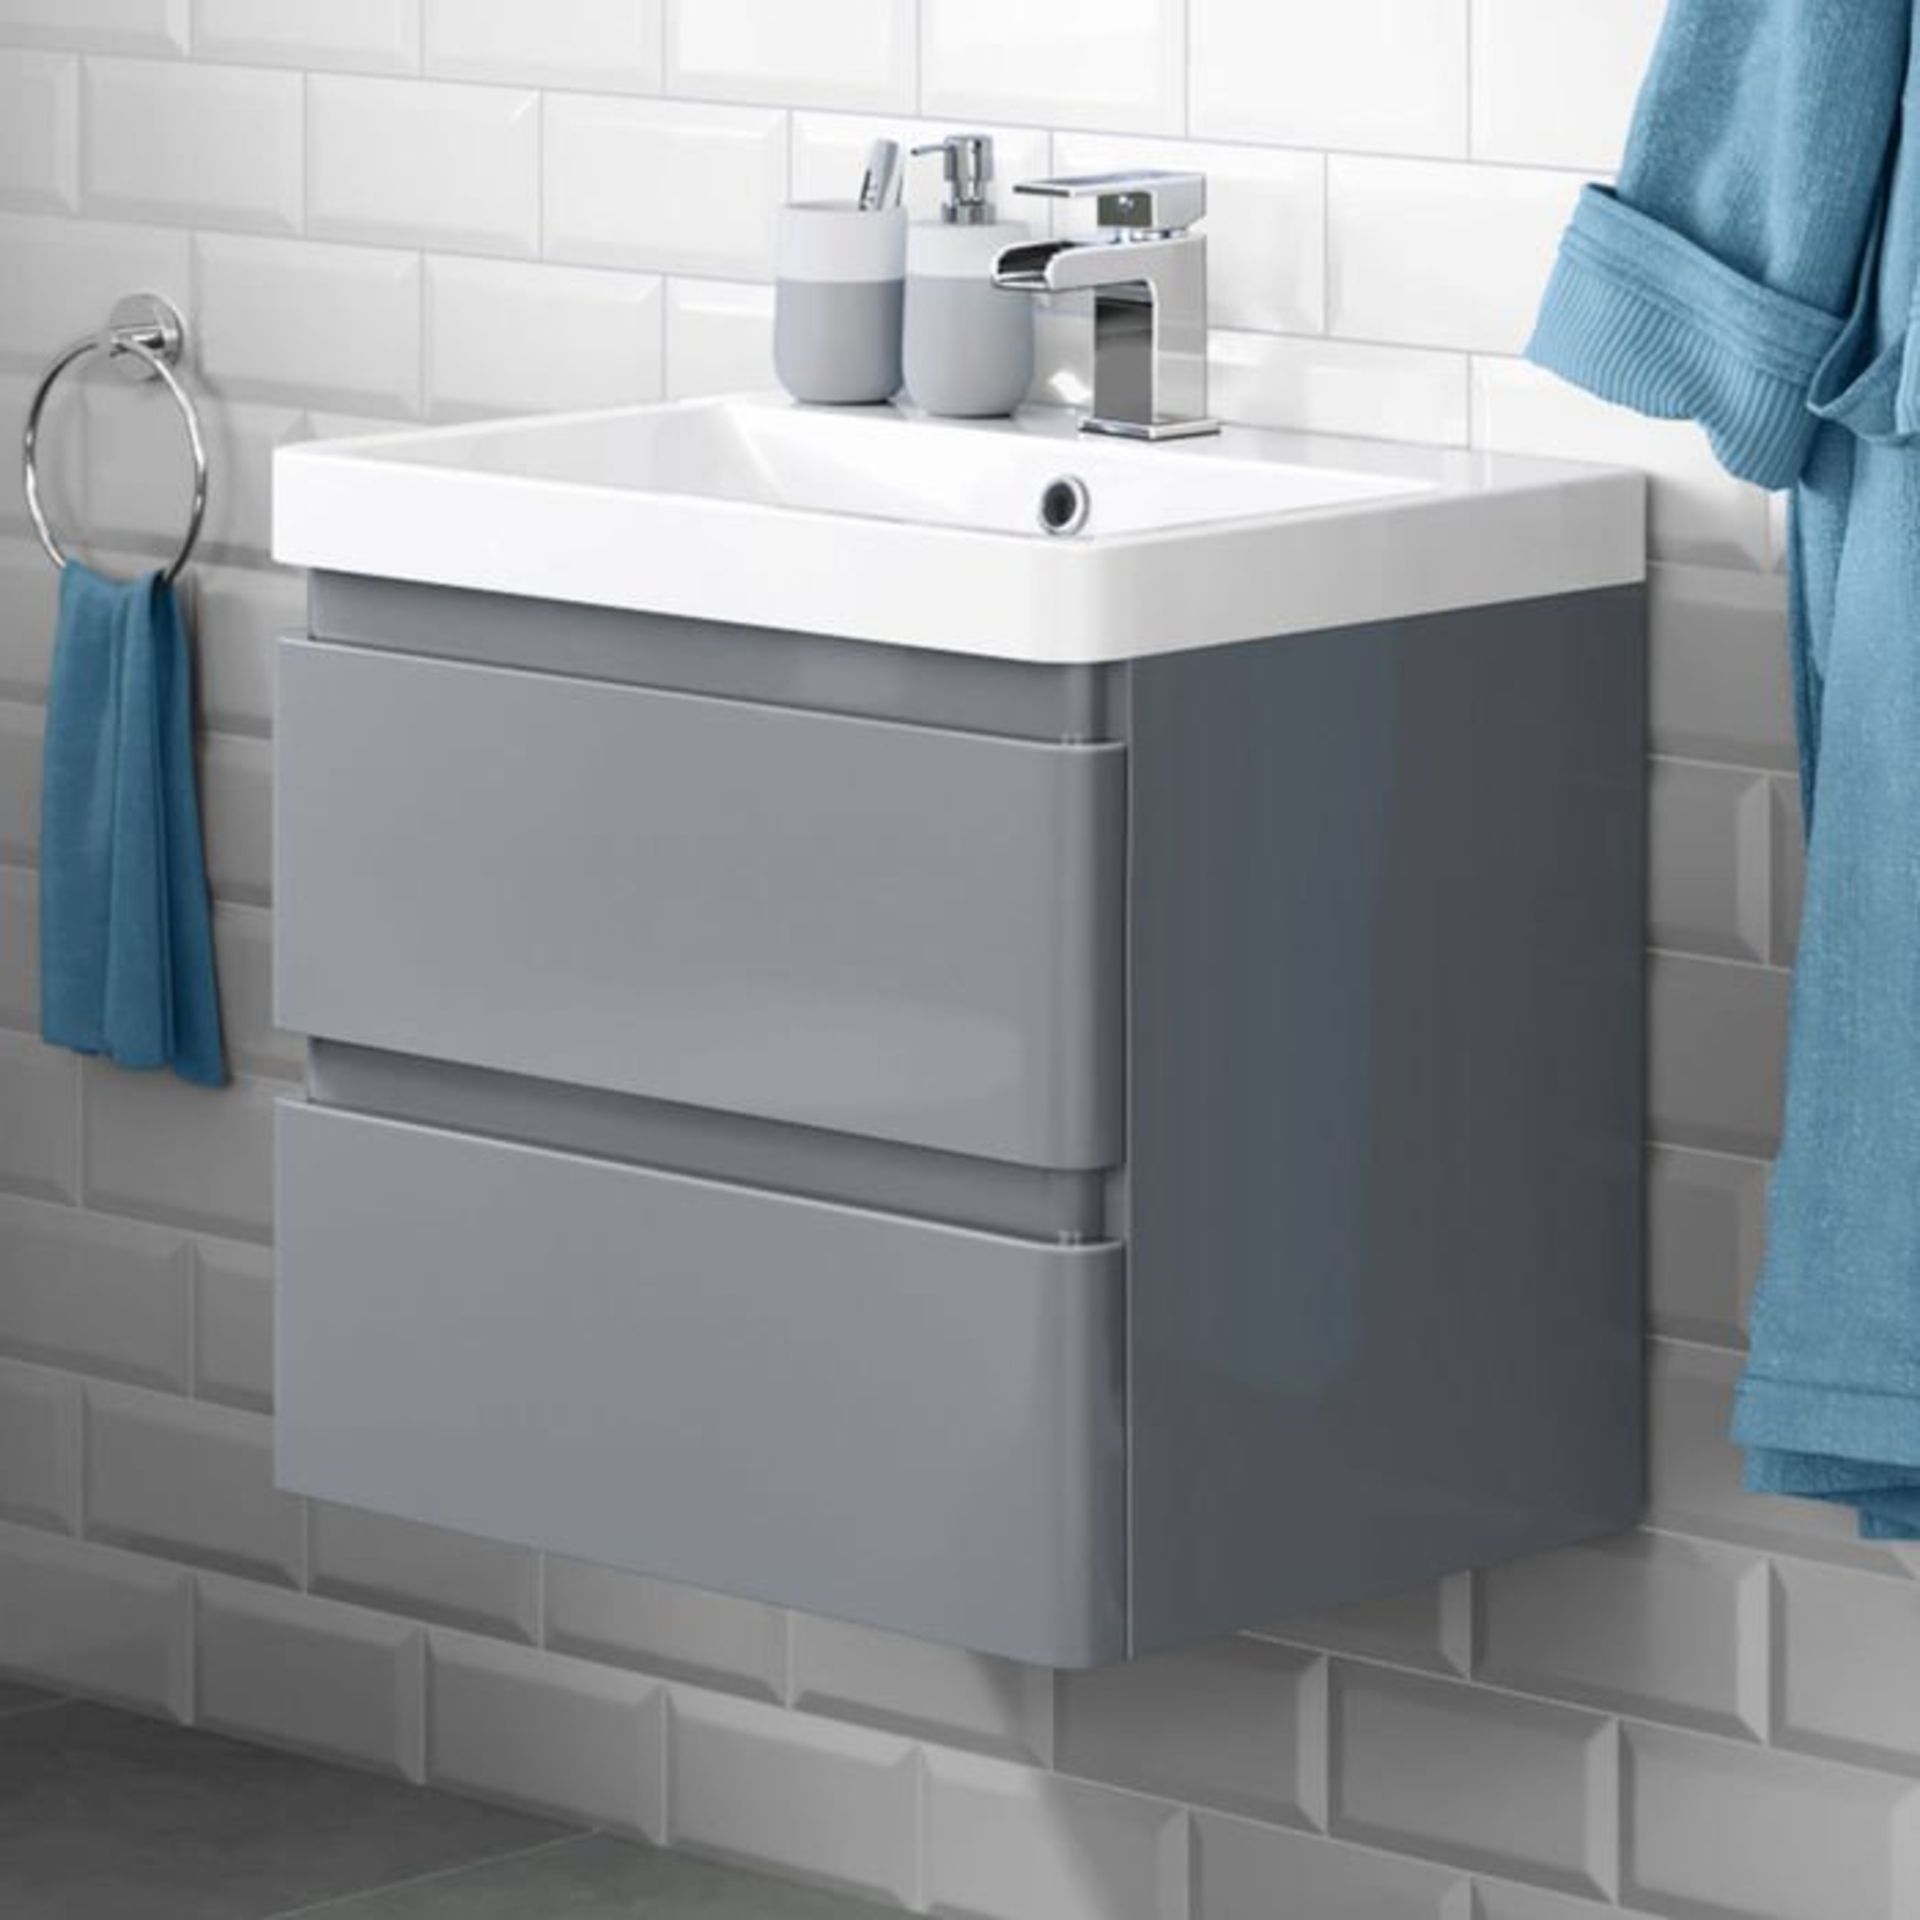 (S133) 600mm Denver II Gloss Grey Built In Basin Drawer Unit - Wall Hung RRP £499.99. COMES COMPLETE